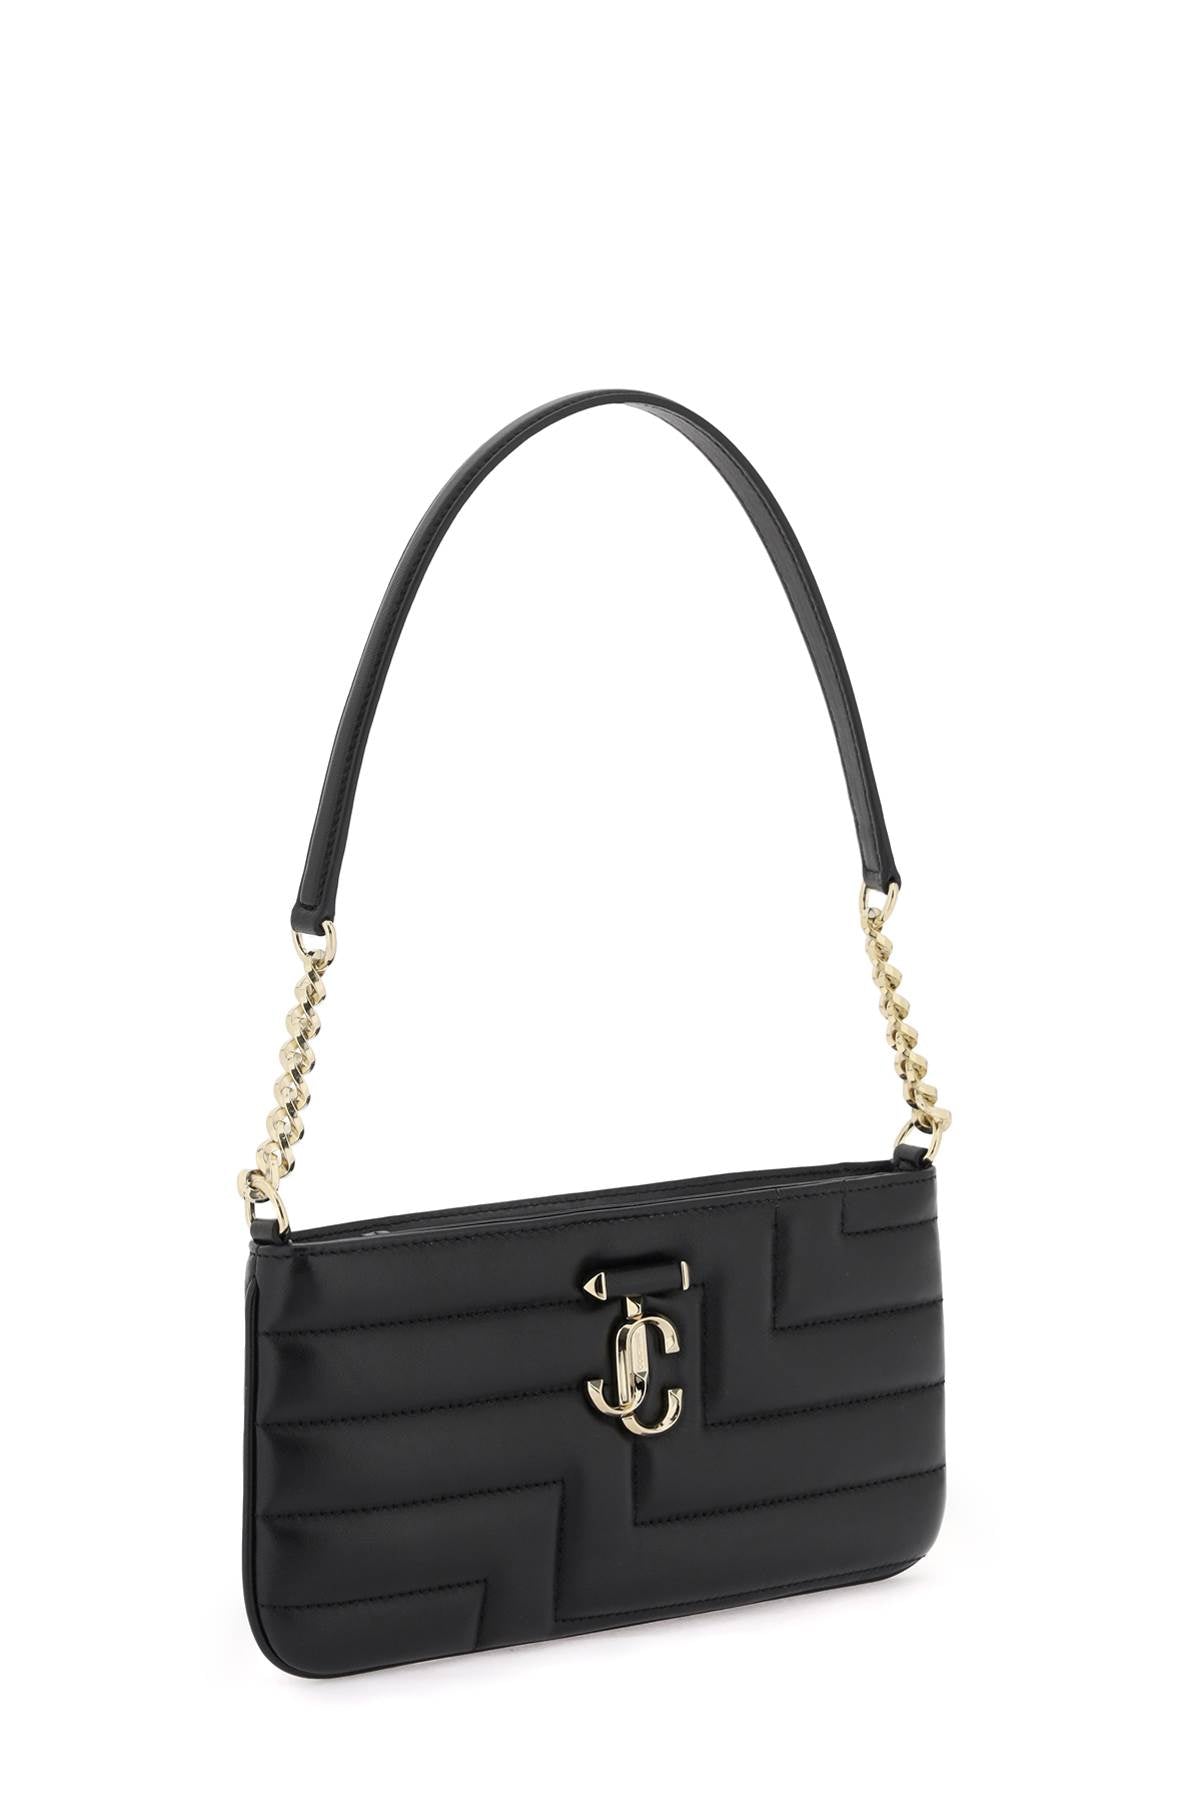 JIMMY CHOO Quilted Leather Slim Shoulder Bag with Gold Monogram and Chain Handle